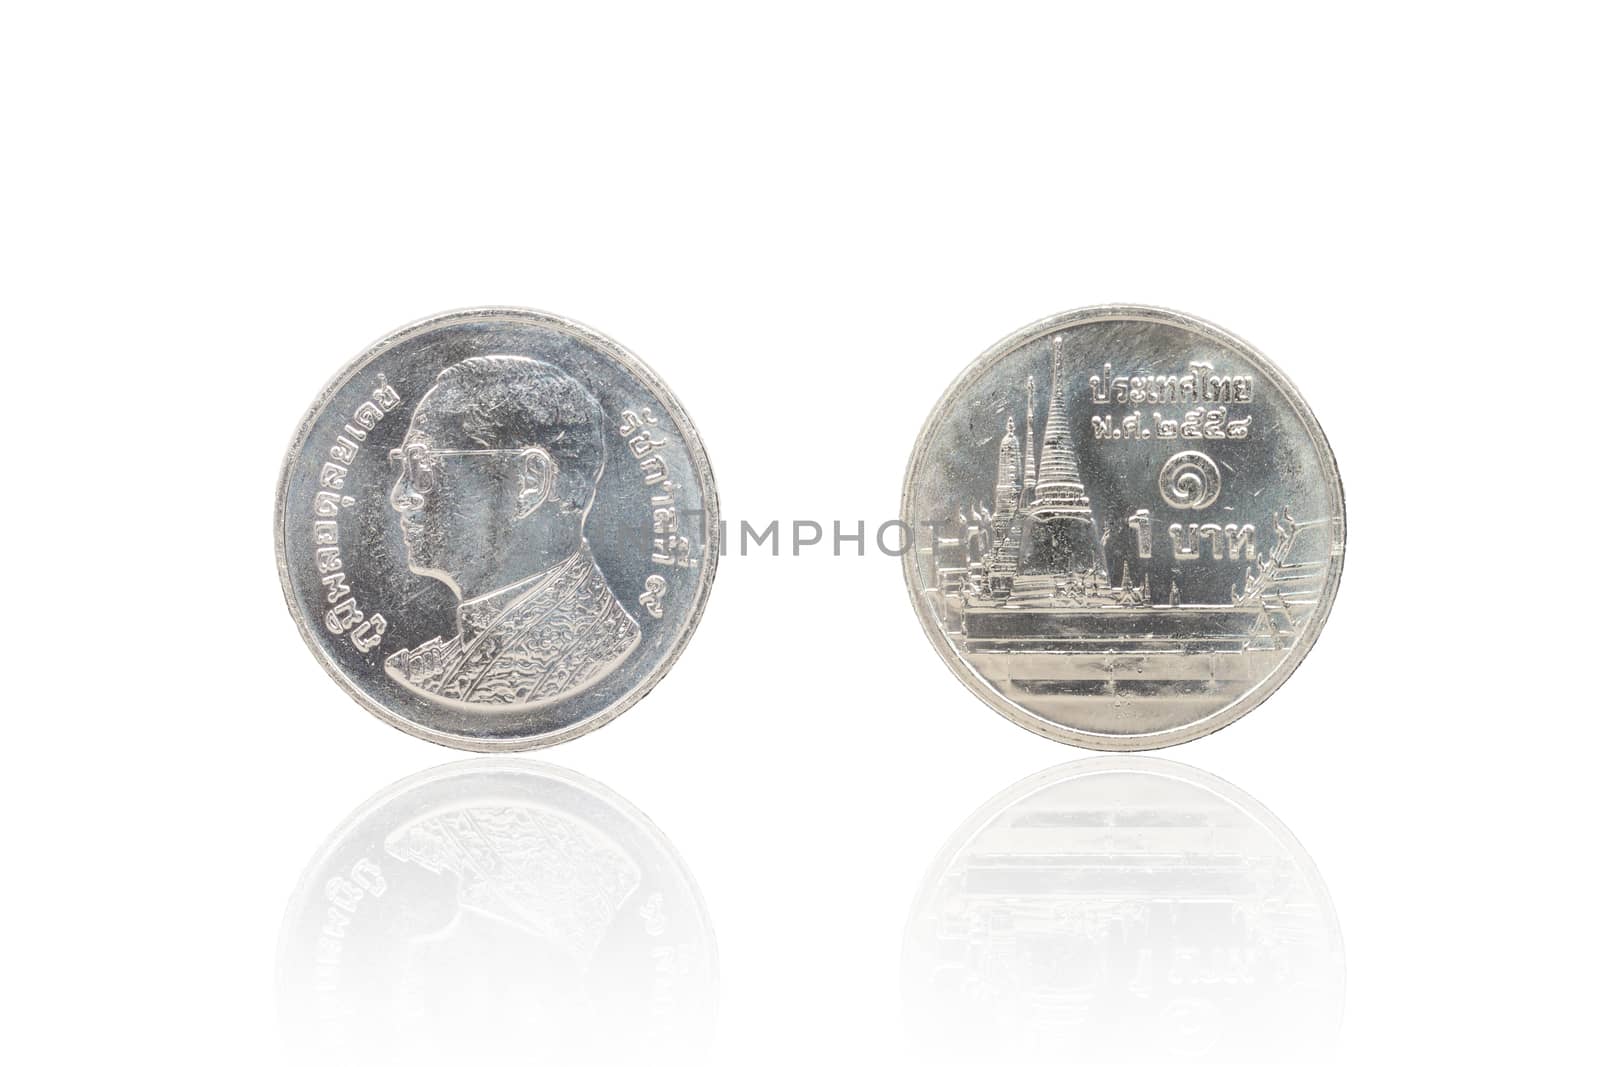 Thai coin 1 baht and reflect. by stigmatize